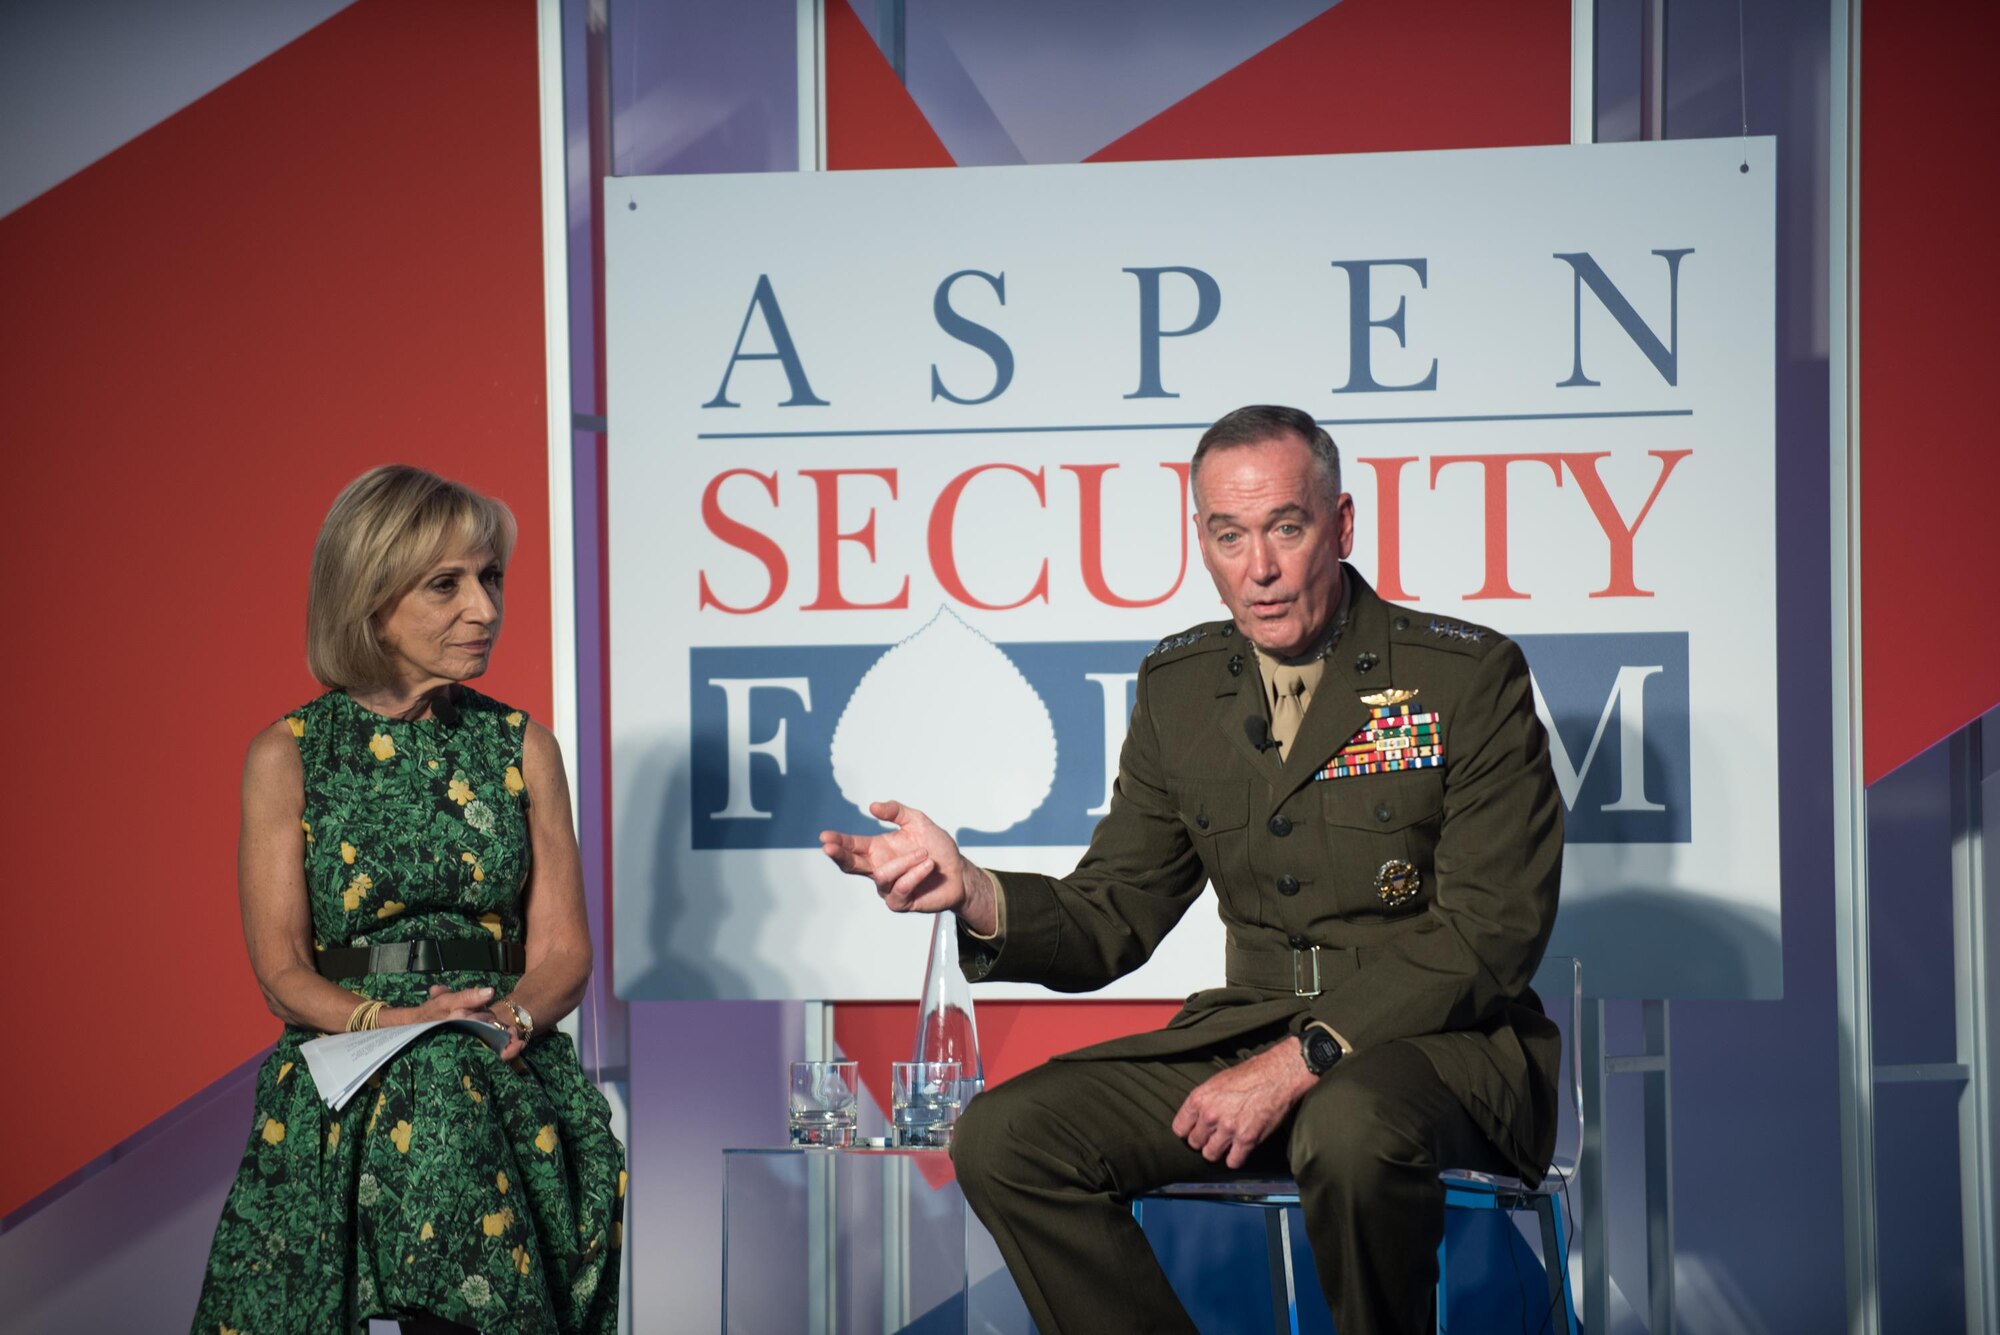 U.S. Marine Corps Gen. Joseph F. Dunford, Jr., chairman of the Joint Chiefs of Staff, responds to a question alongside moderator Andrea Mitchell, NBC News Chief Foreign Affairs Correspondent, at the 2017 Aspen Security Forum in Colo., July 22, 2017. Gen. Dunford explained U.S. strategy and how it would be carried out in the years ahead.